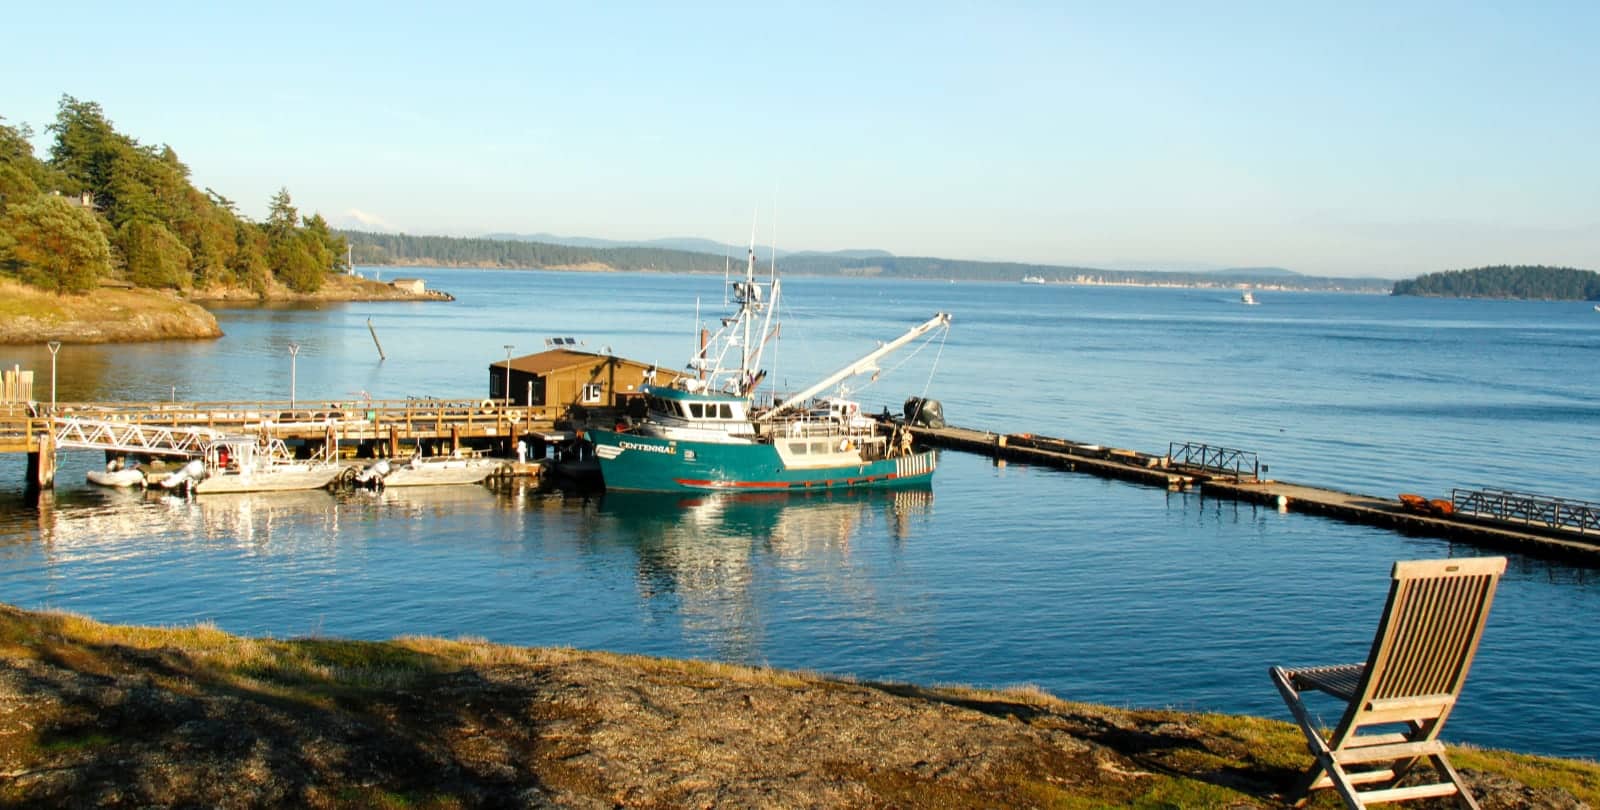 Small green and white fishing boat in harbour